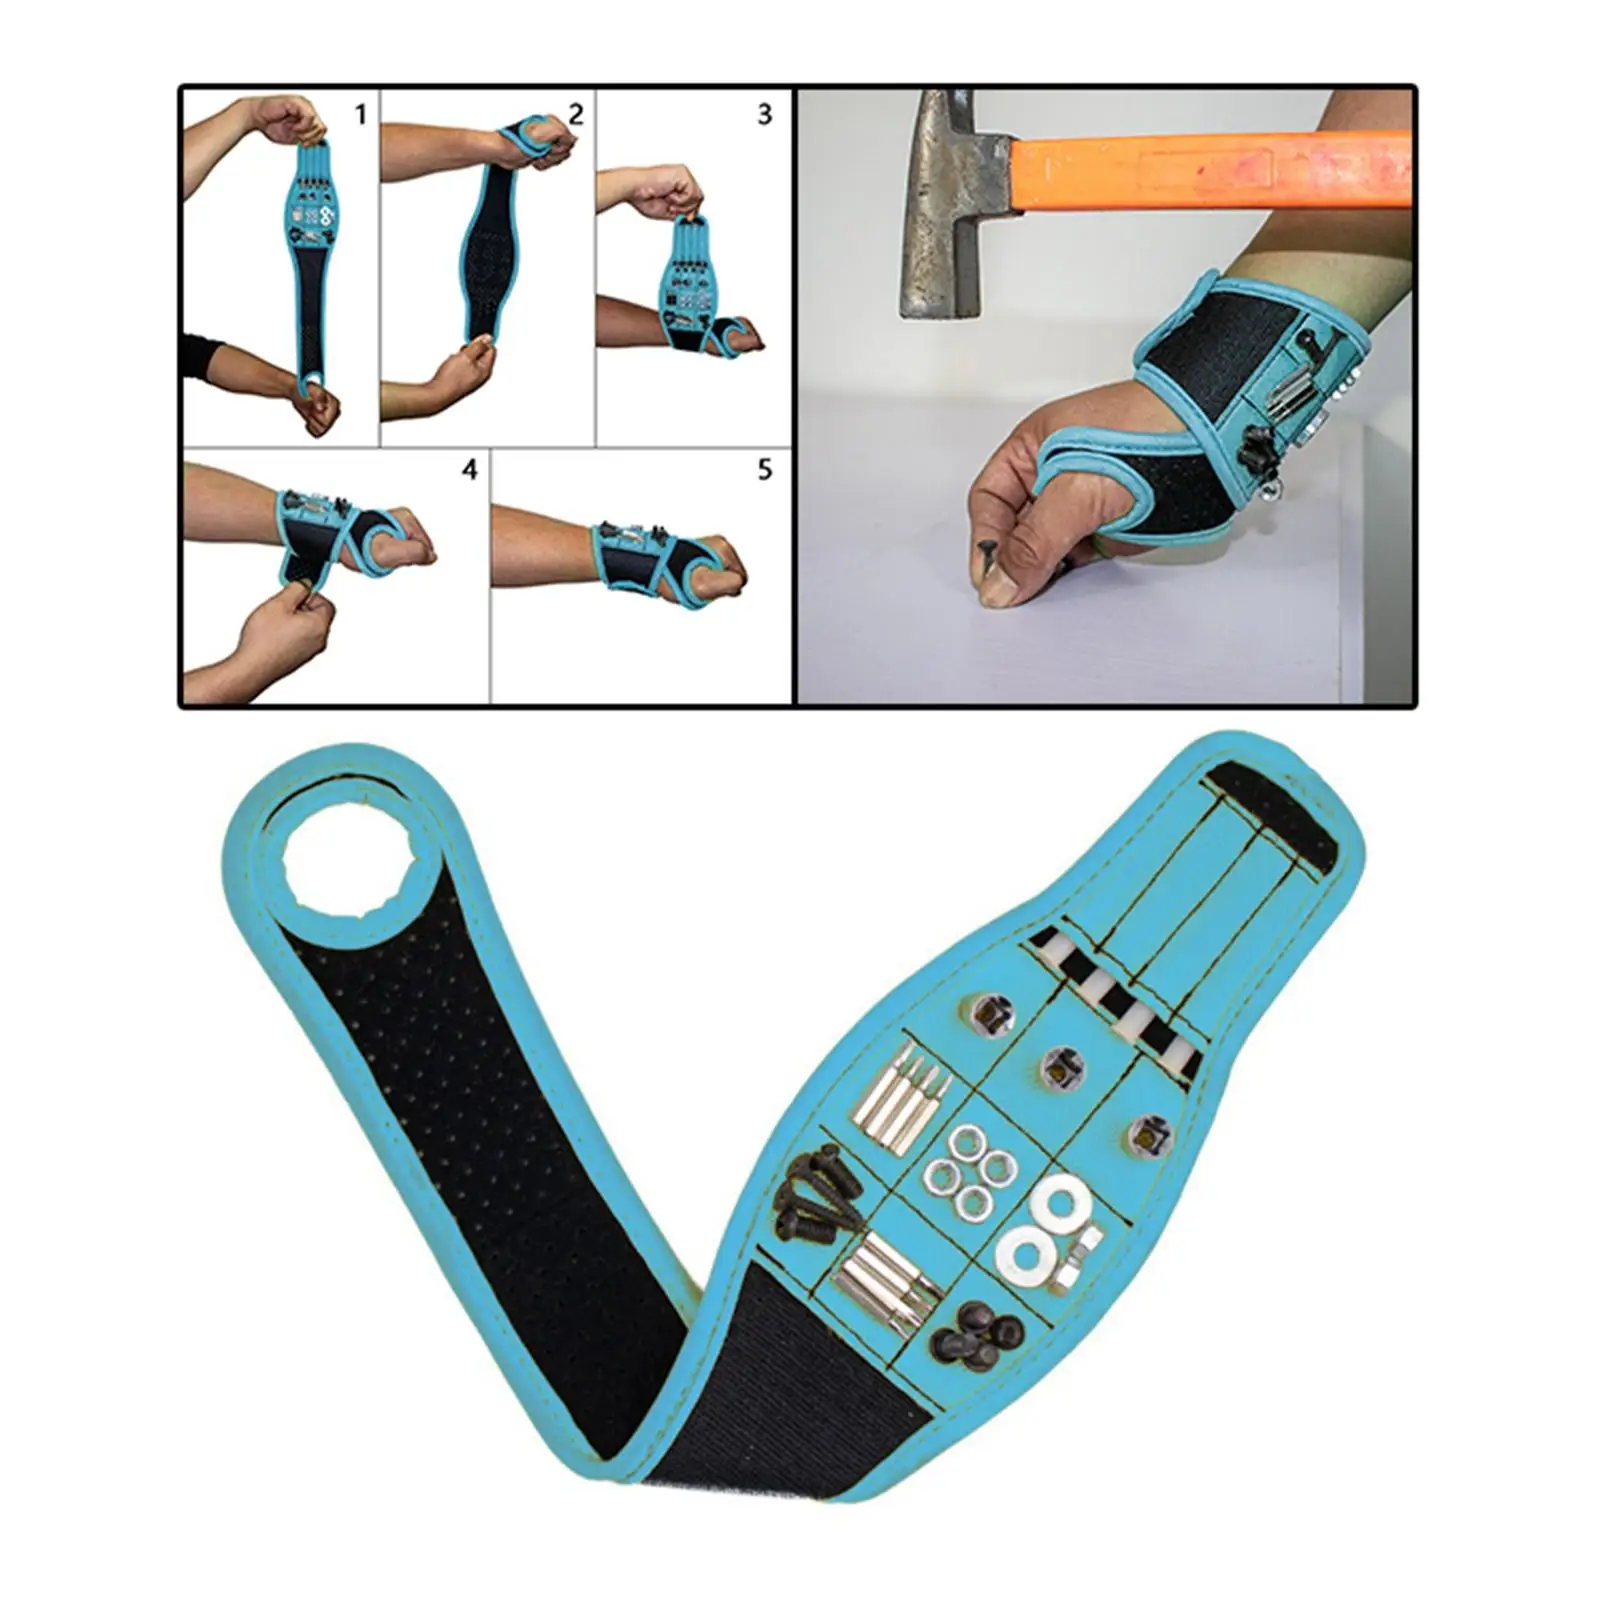 Magnetic Wristband, Holder Organiser with 9 Magnets Tool Bracelet for Holding Screws Bits Fasteners Handyman Dad